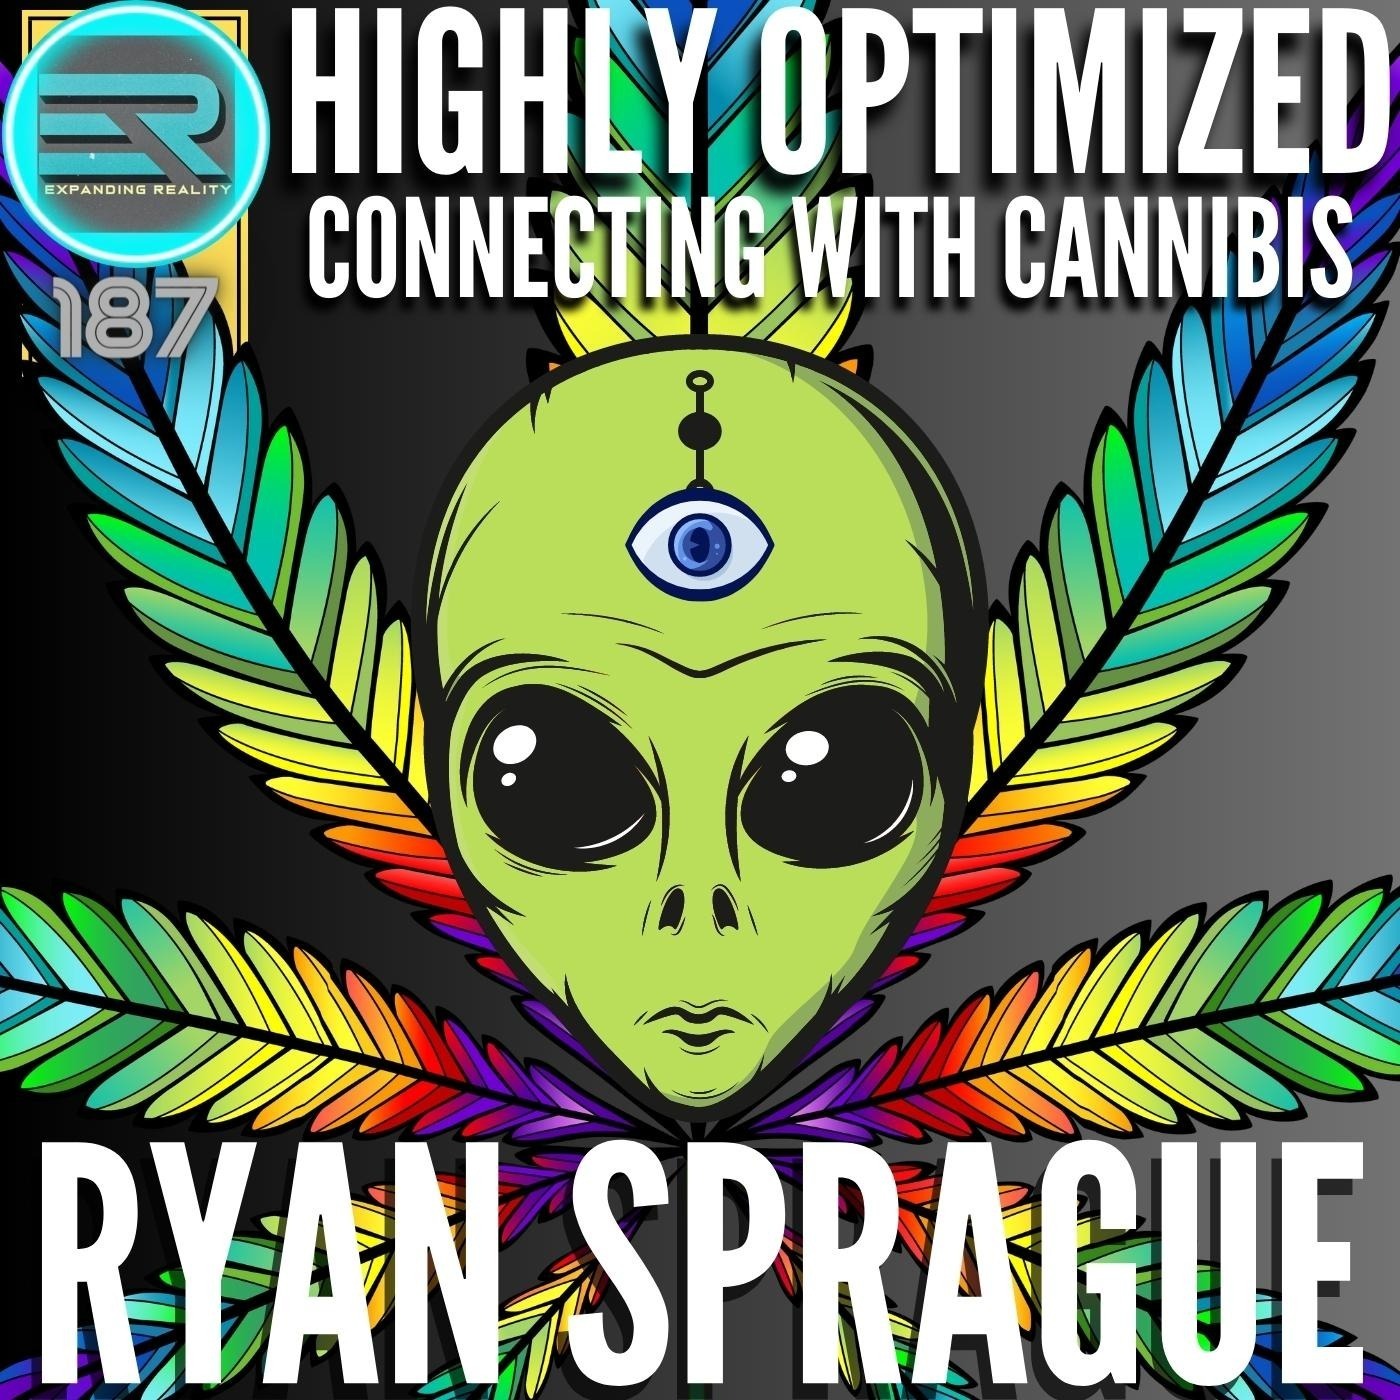 187 | Ryan Sprague | Highly Optimized | Connecting with Cannibis